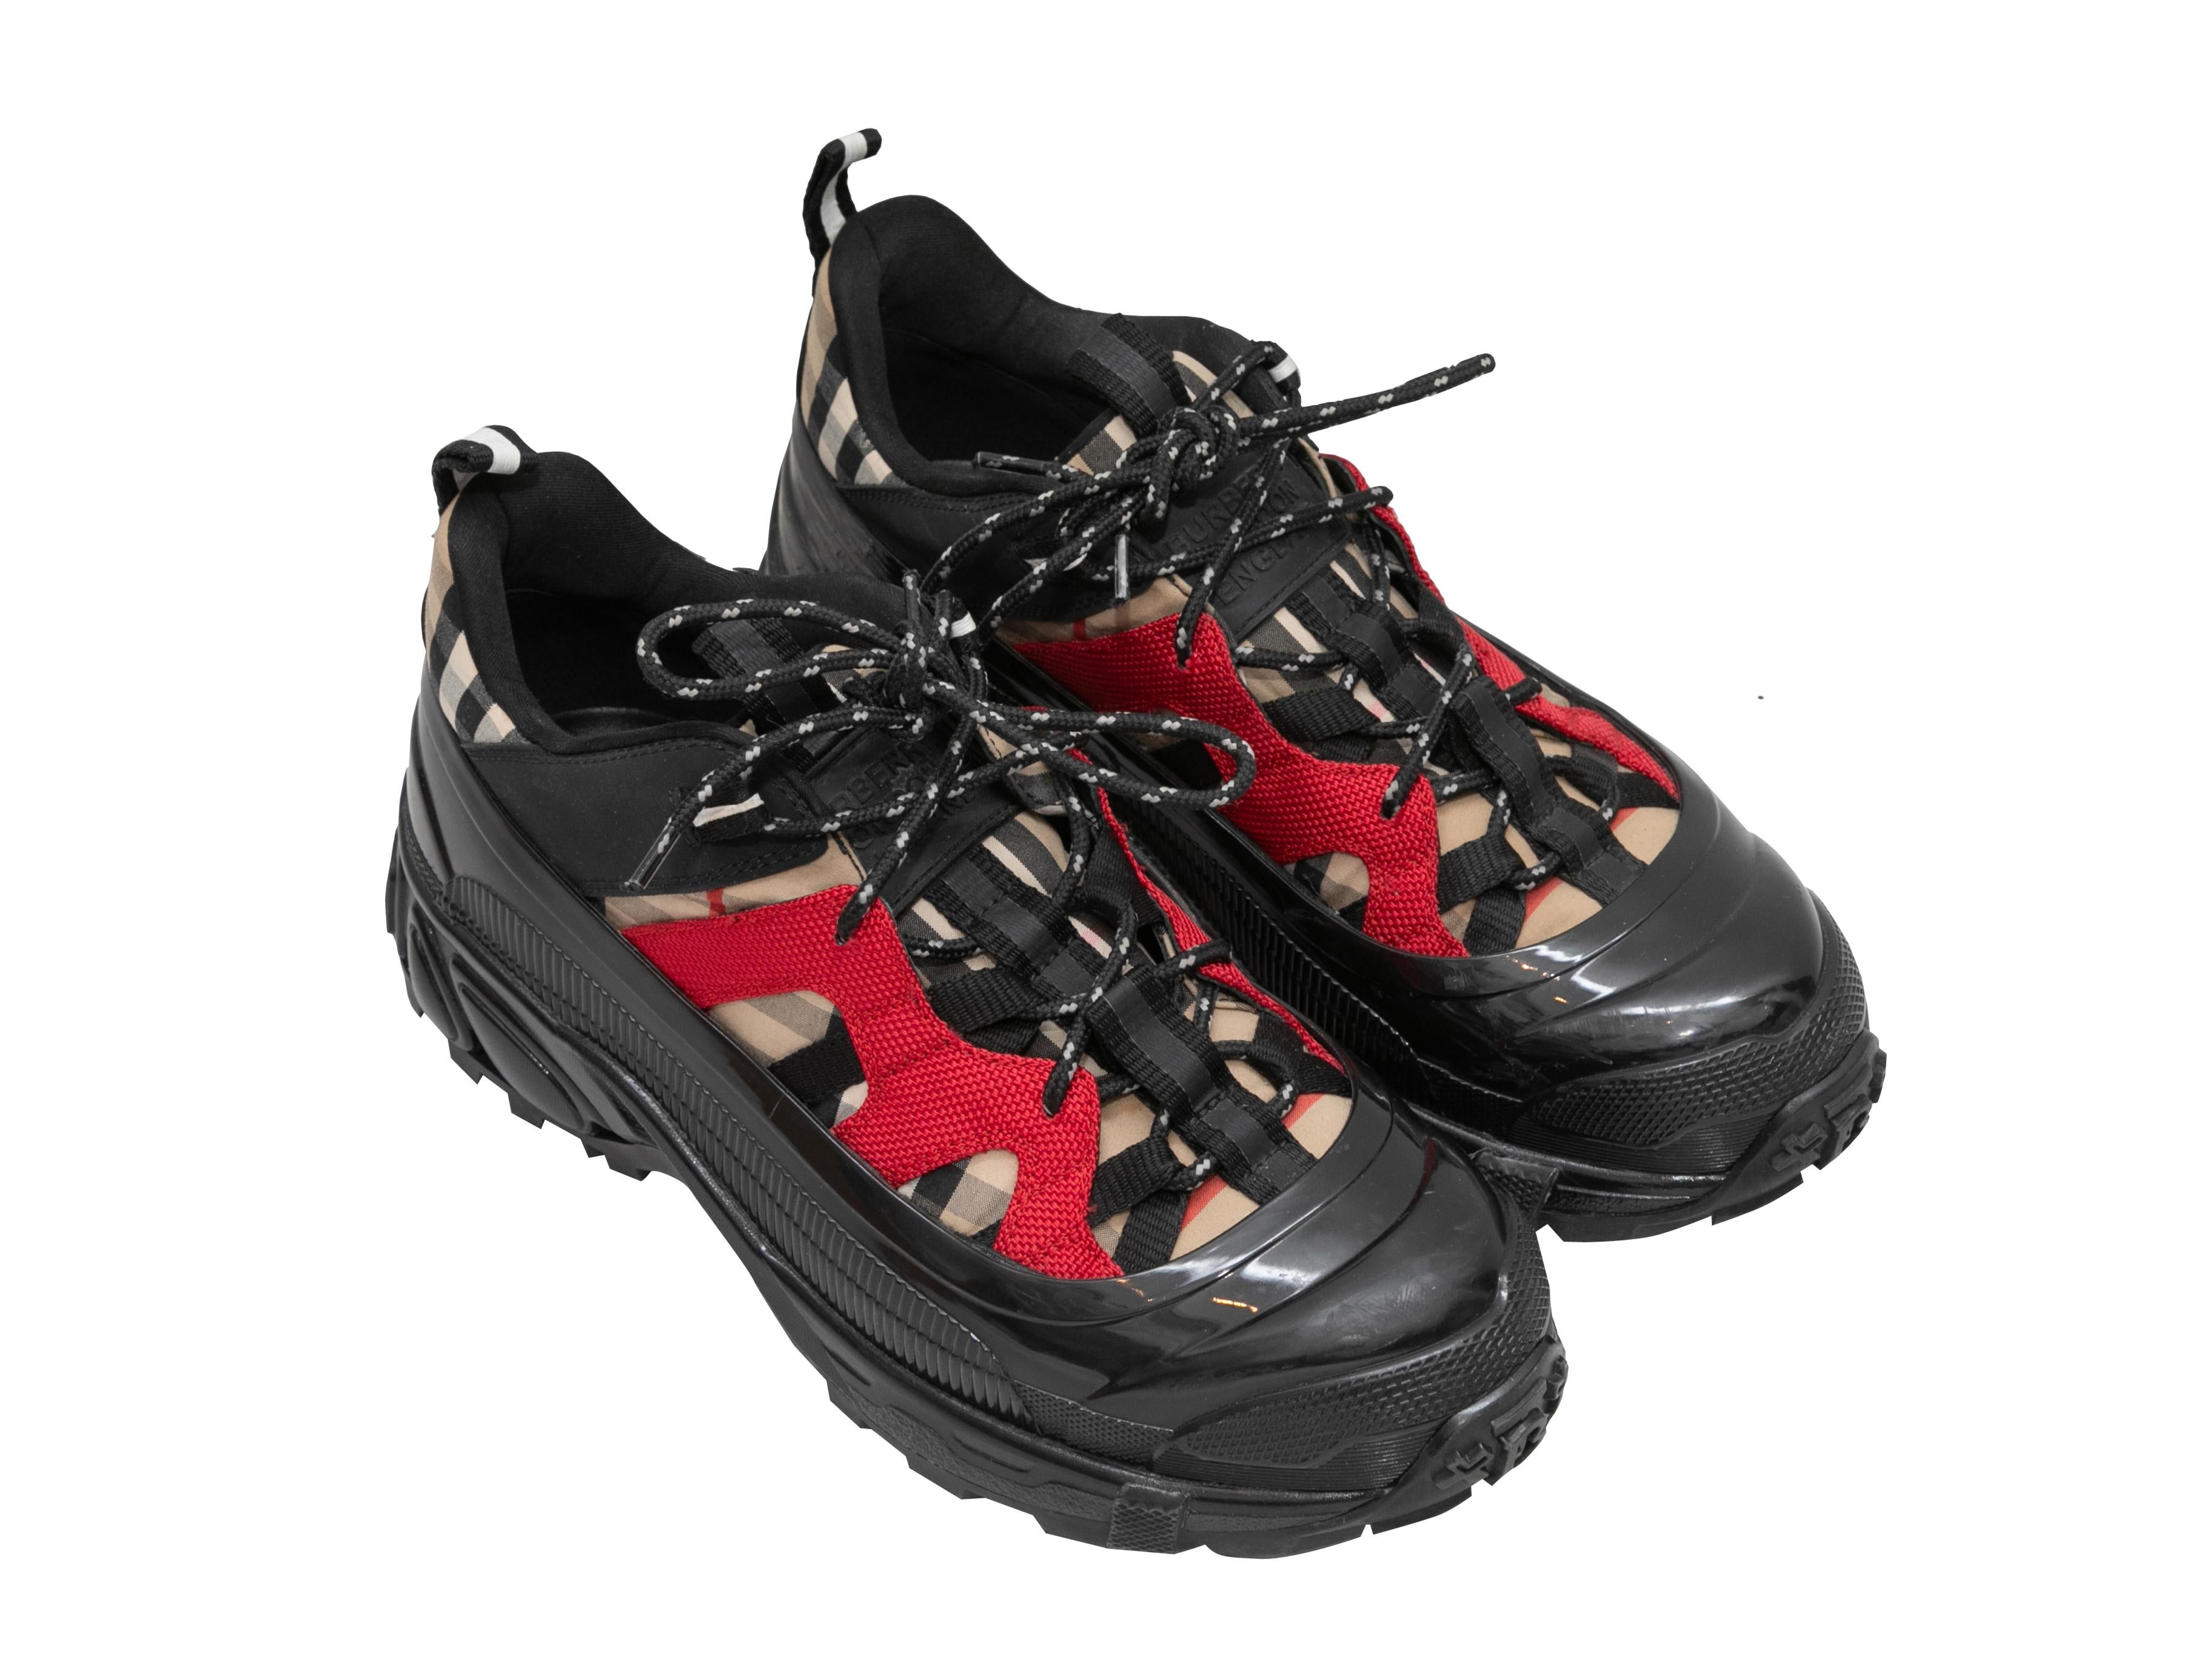 Black and multicolor Arthur low-top sneakers by Burberry. Nova Check trim. Rubber soles. Lace-up tie closures at tops.

Designer Size: 38.5
US Recommended Size: 8.5